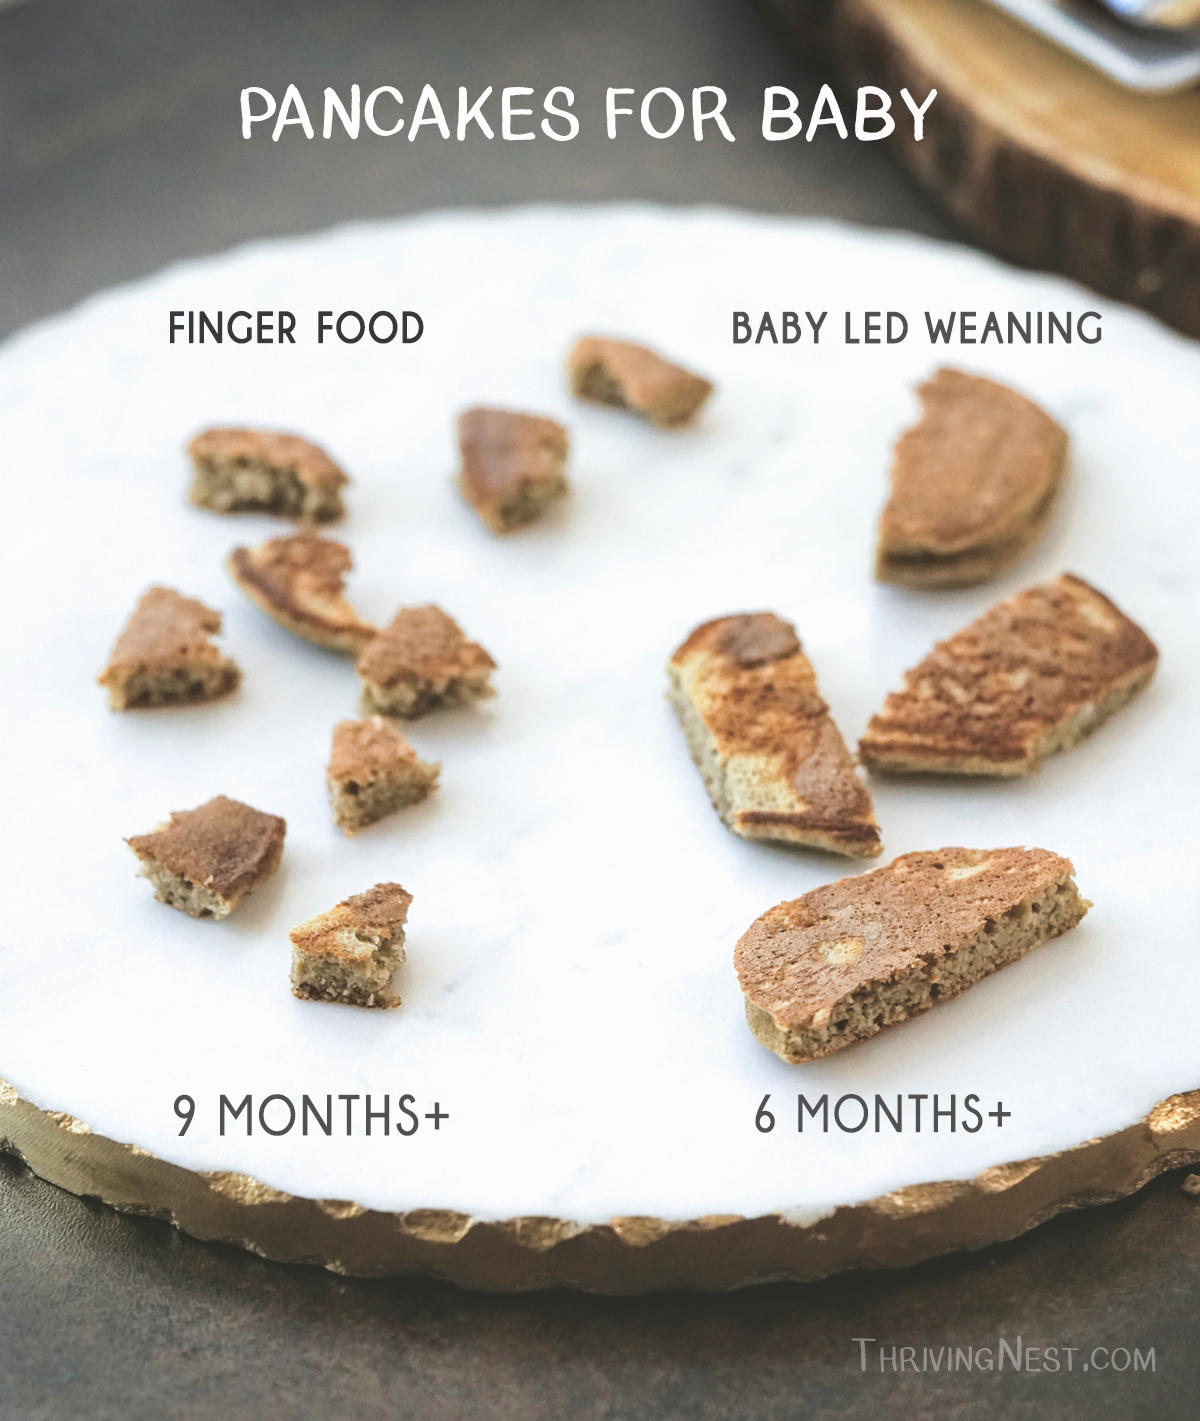 Baby led weaning pancakes, picture showing pancake serving size for babies 6 month old and up.